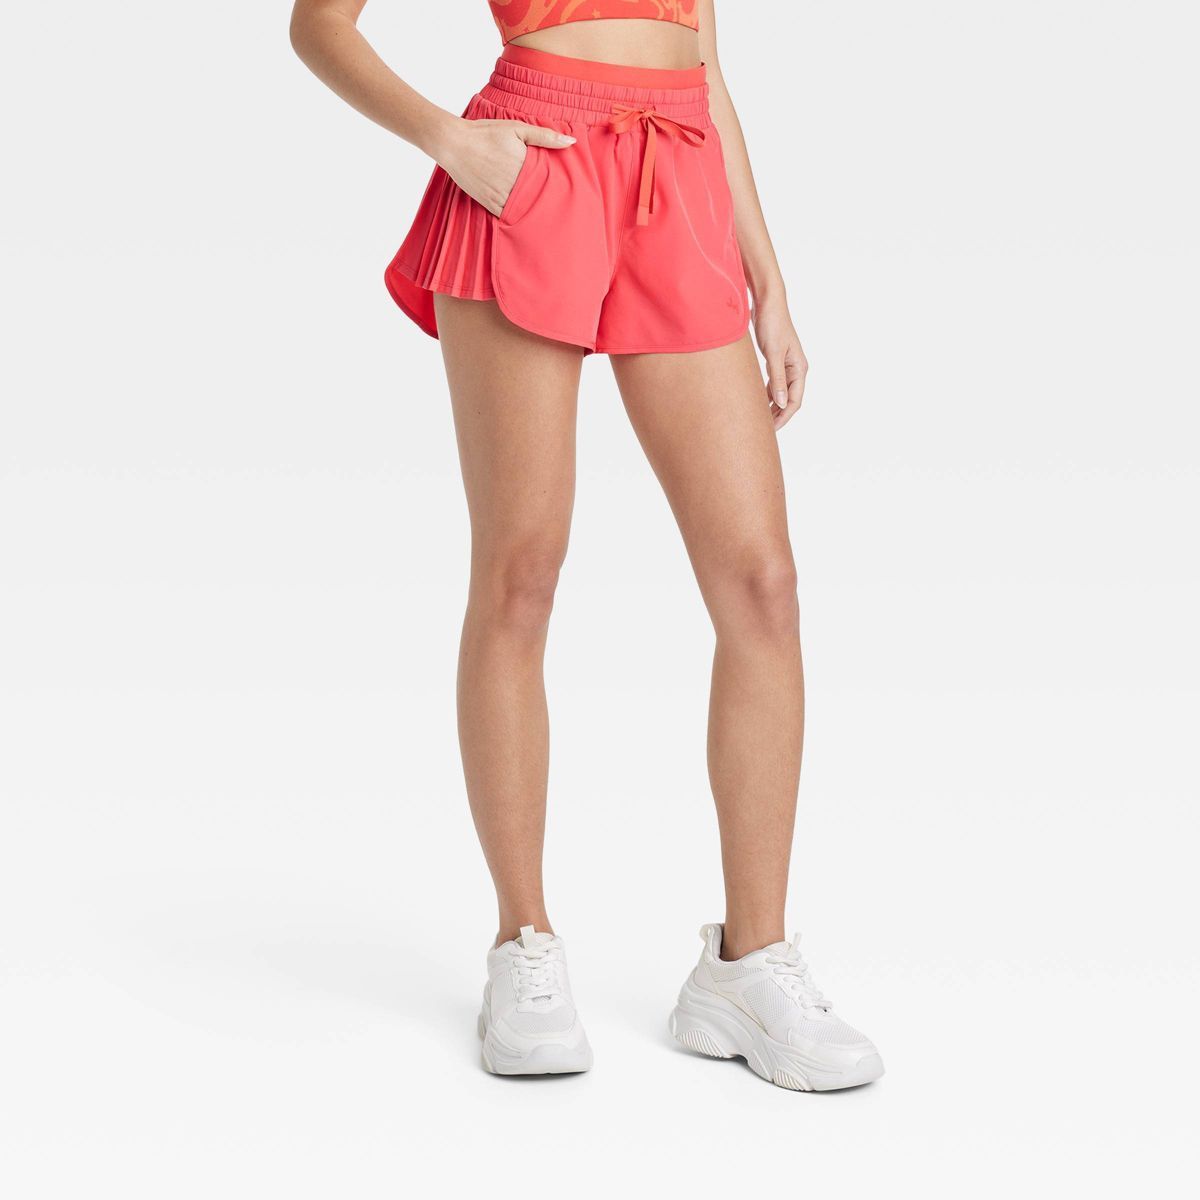 Women's High-Rise Pleated Side Shorts 2.5" - JoyLab™ Red S | Target